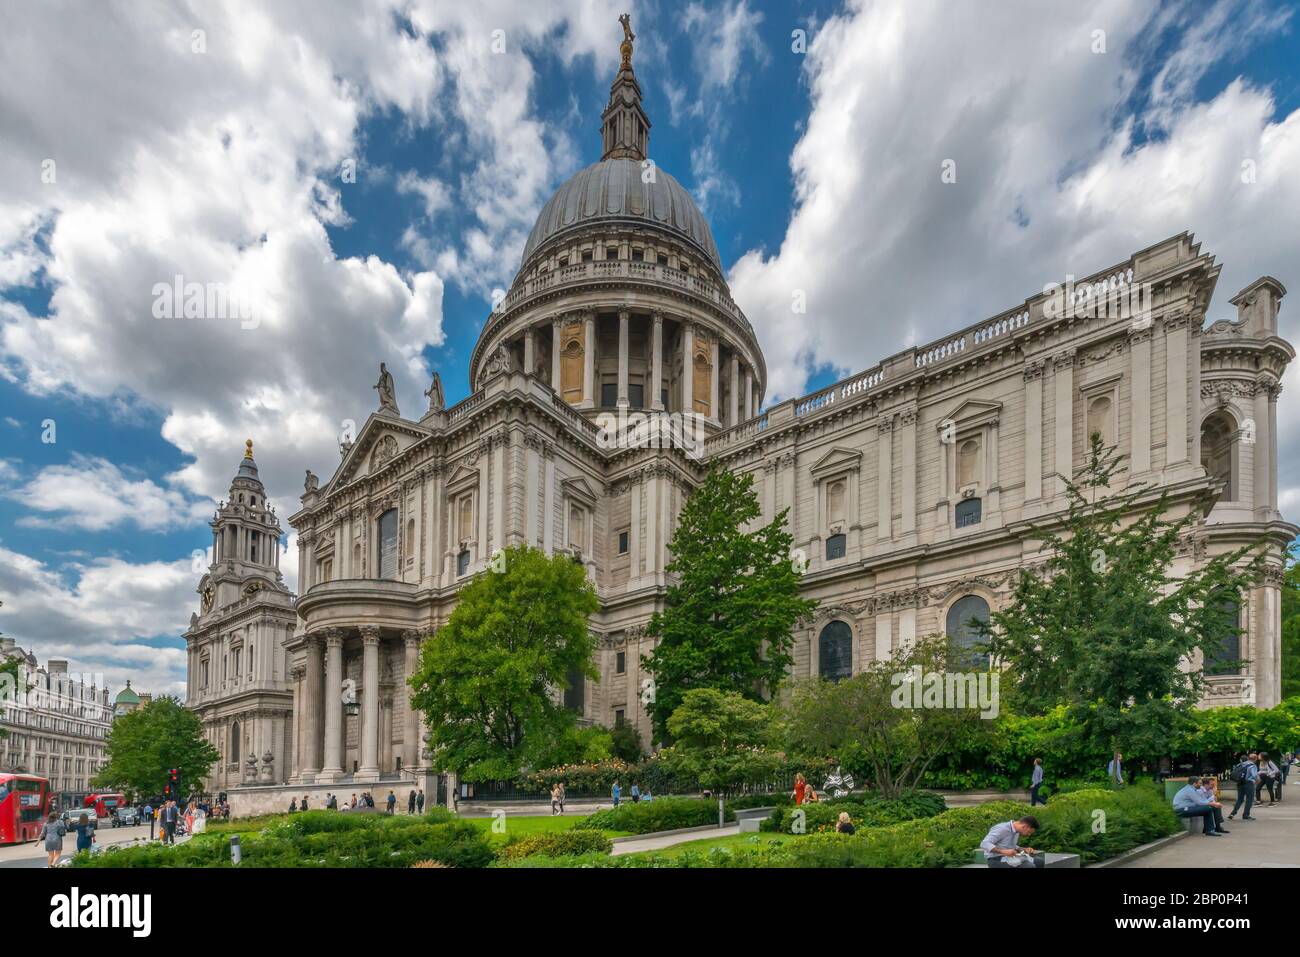 London St. Pauls Cathedral Stockfoto